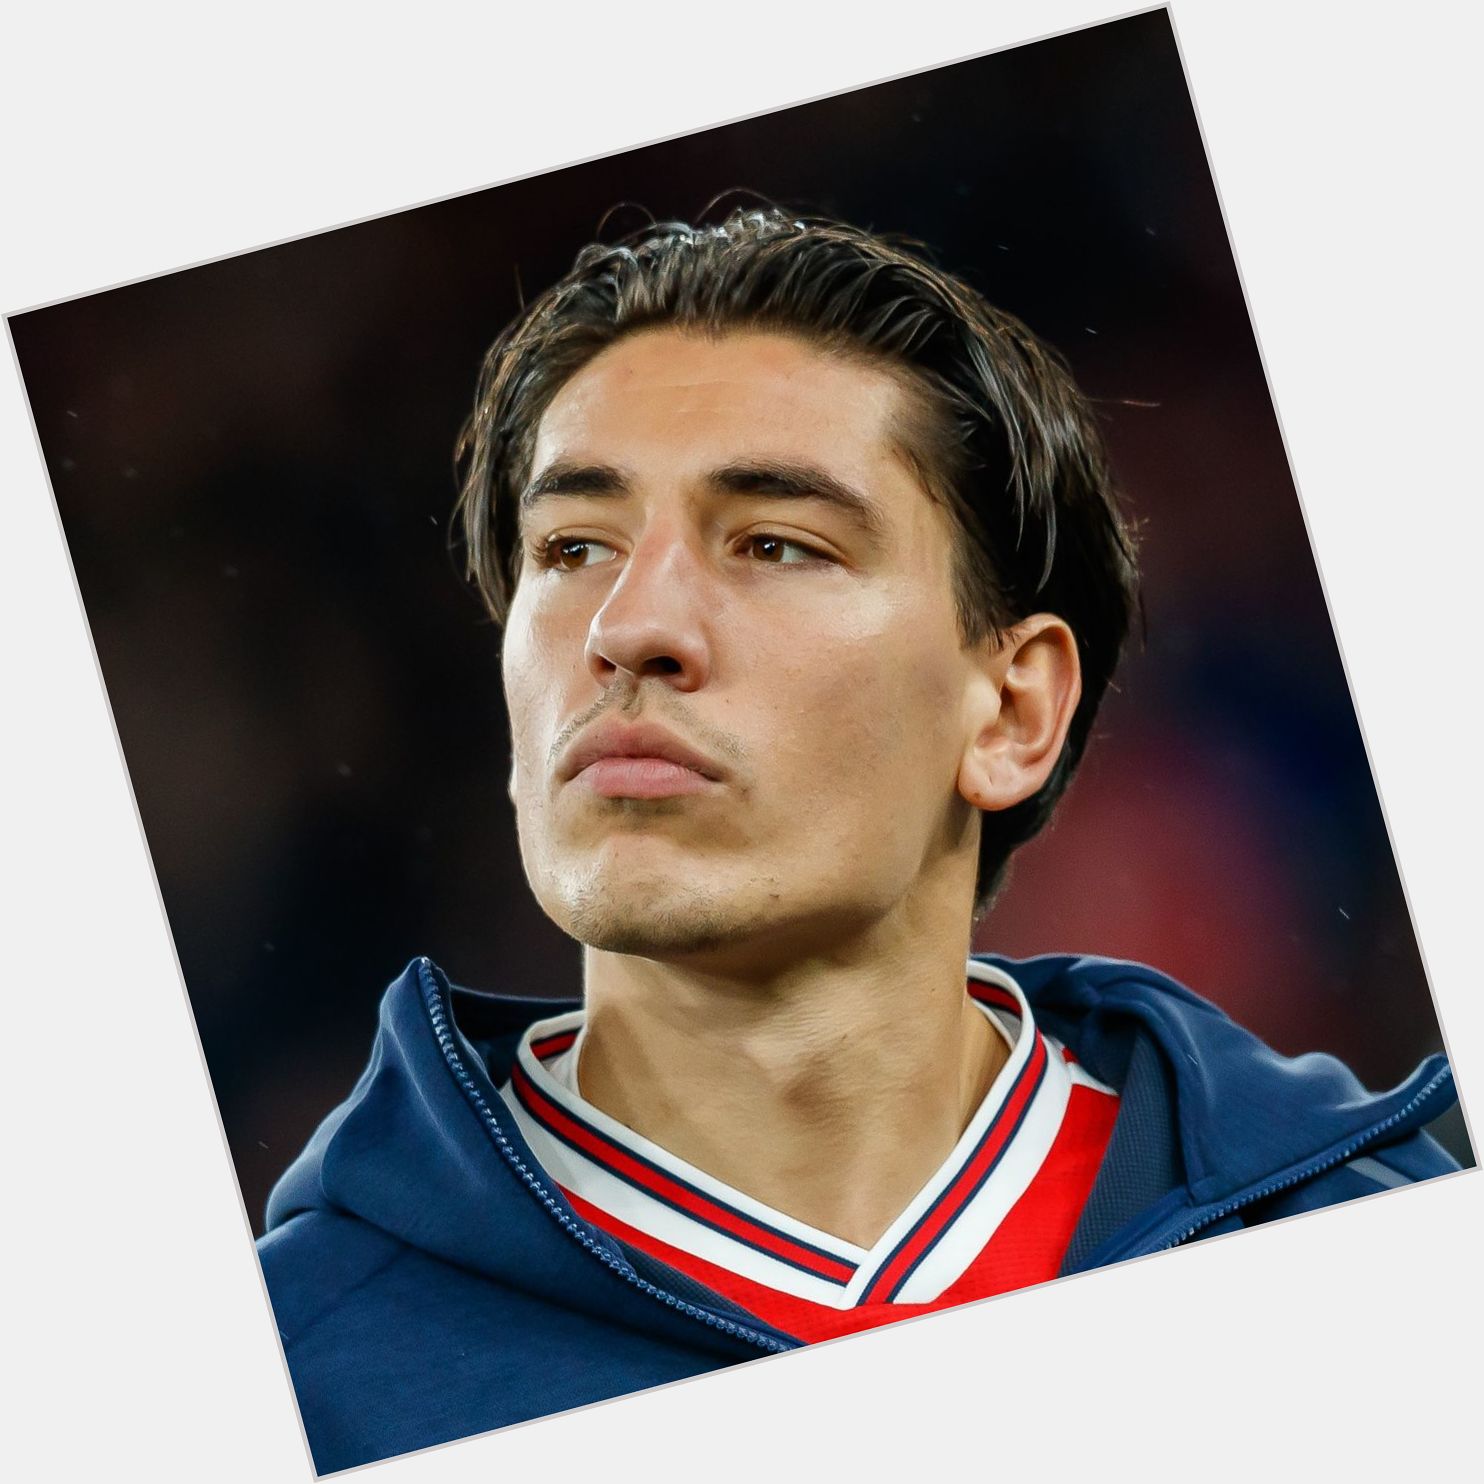 Happy birthday  to our gorgeous Hector Bellerin. Beautiful inside and out
Feliz cumpleanos precioso      